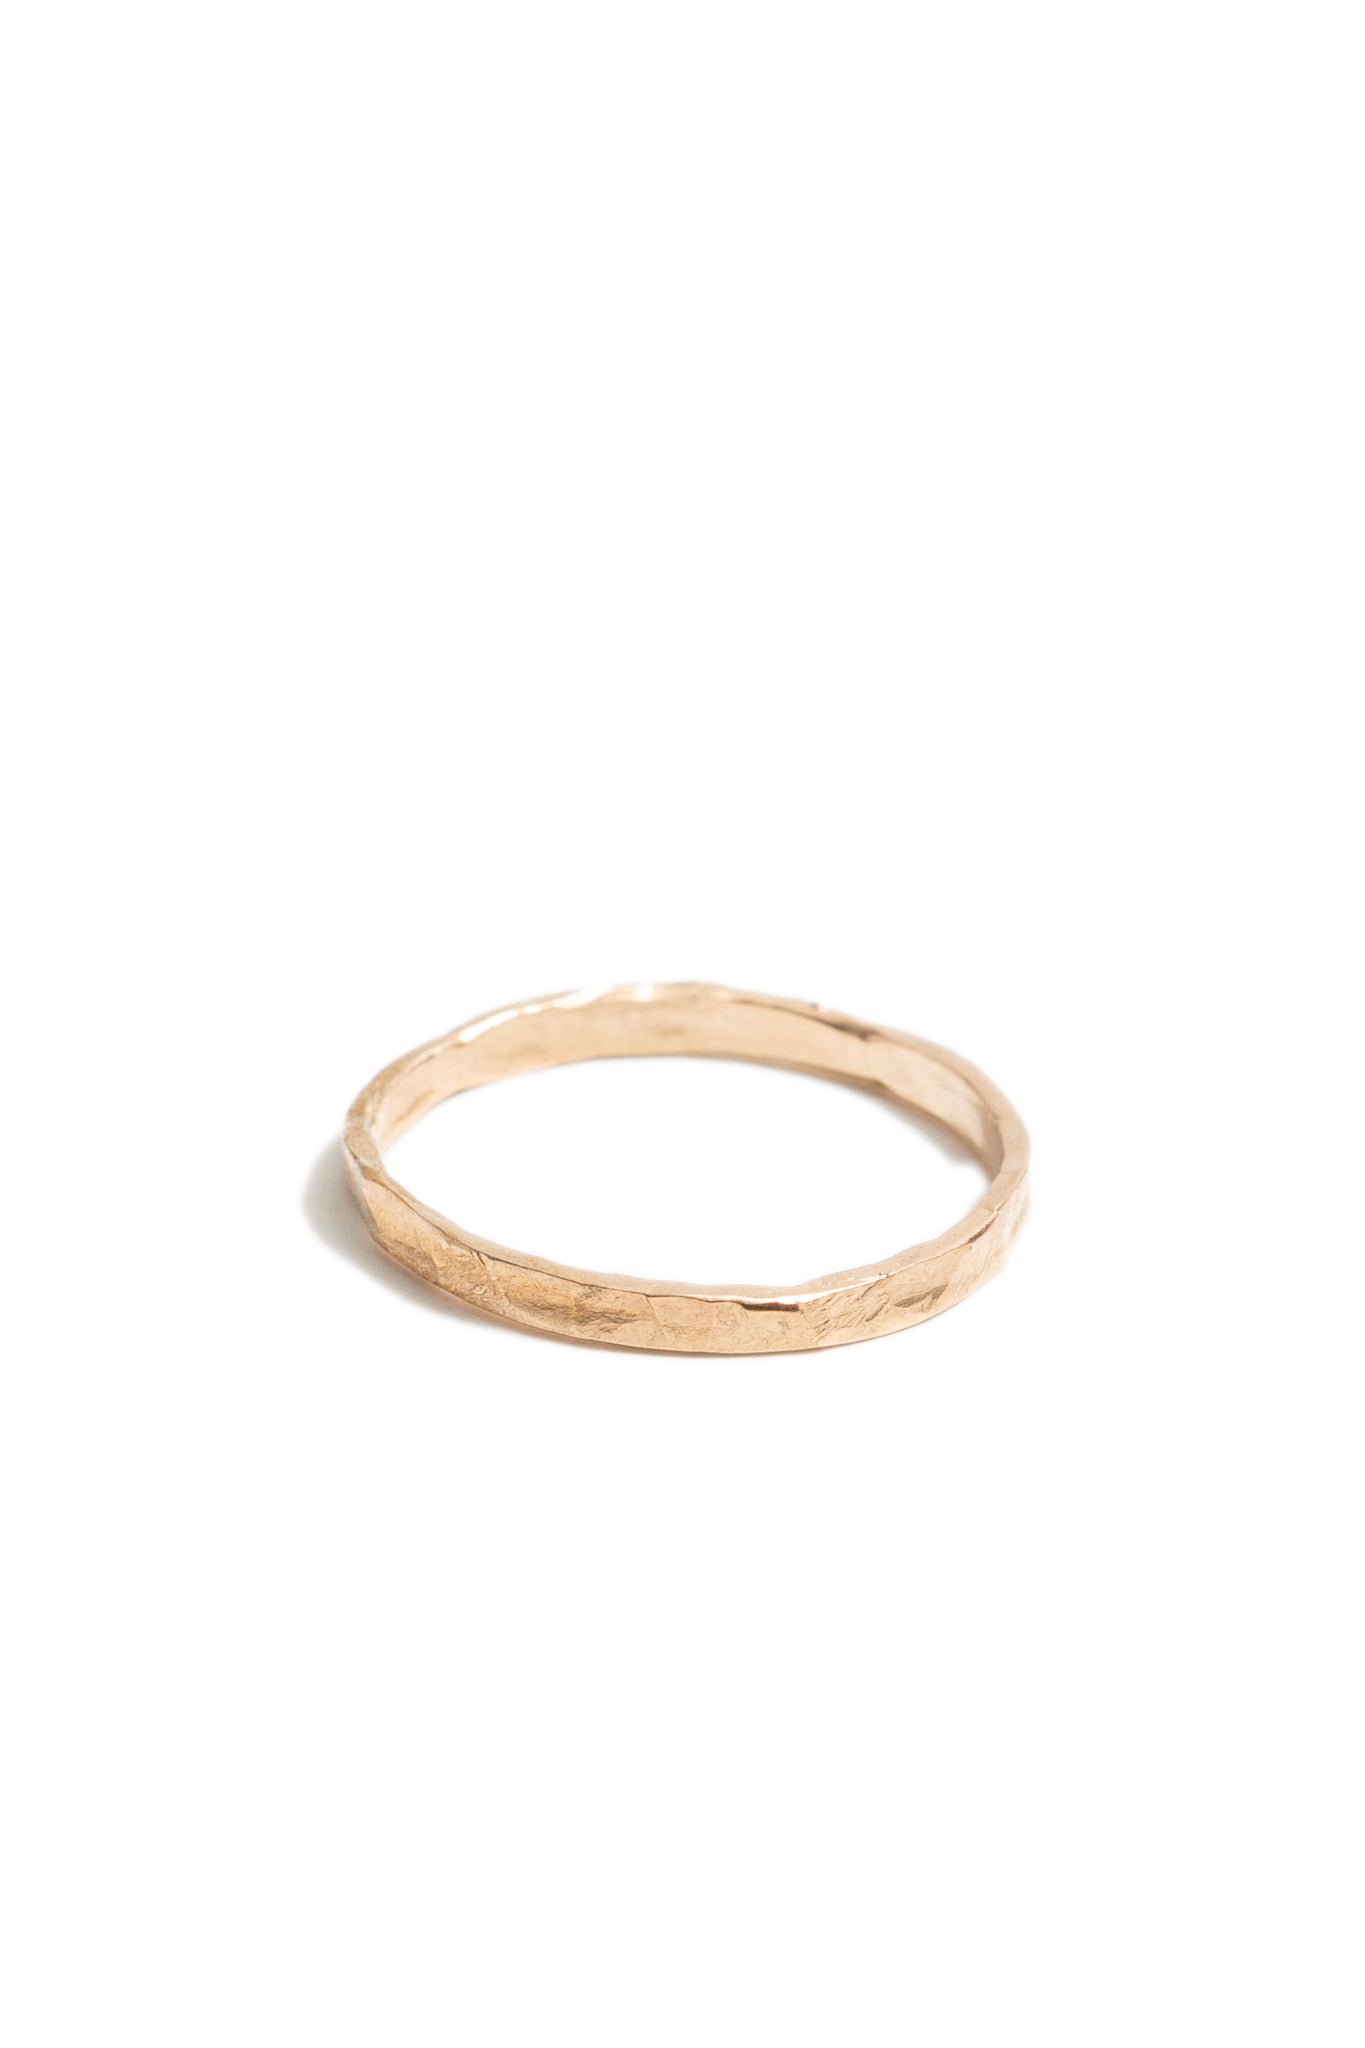 Thin 14K Gold Fill Hammered Stacking Ring